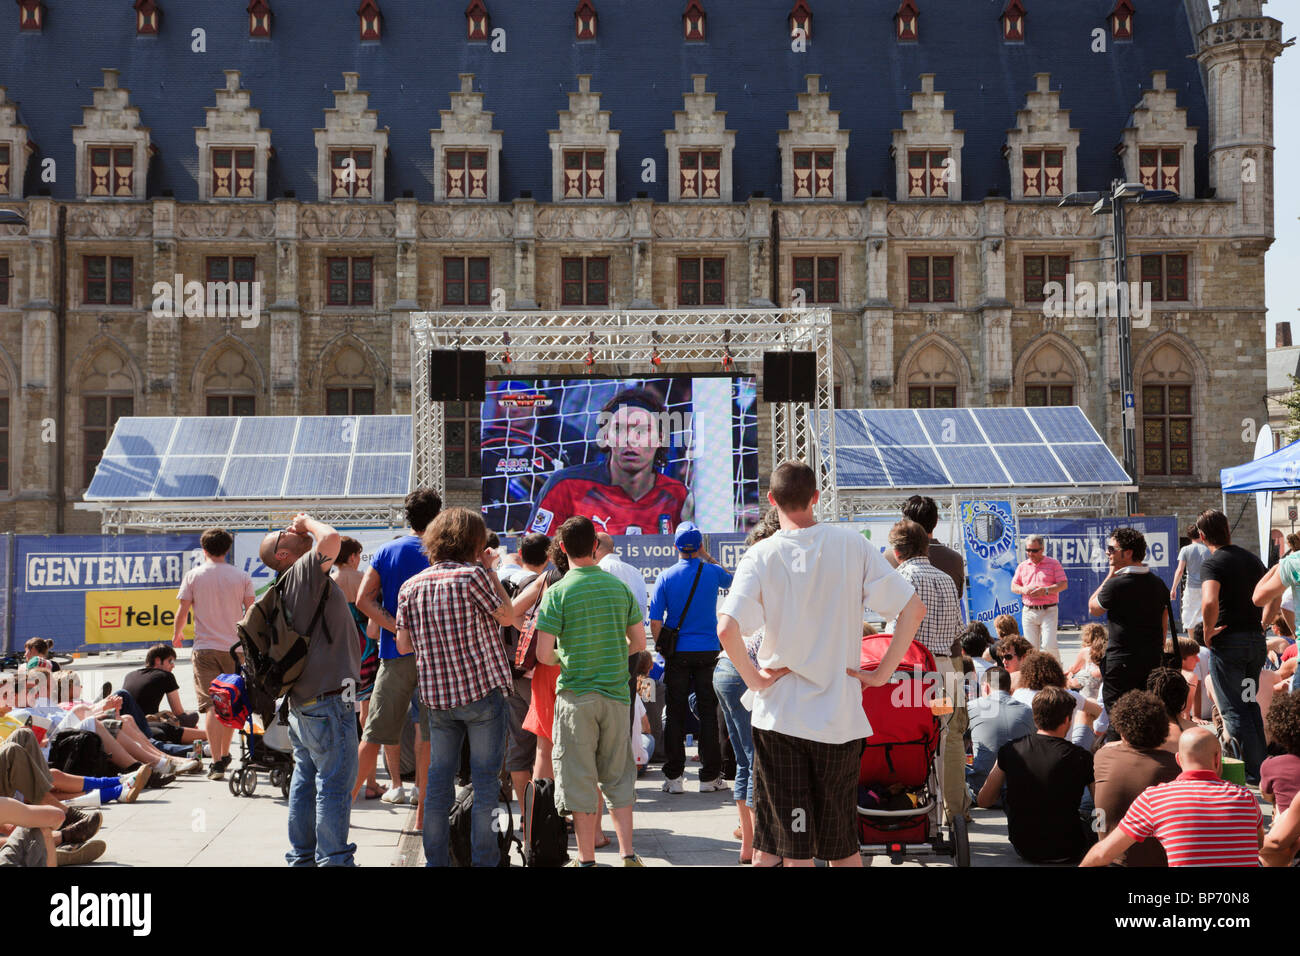 Sint-Baafs Plein, Ghent, Belgium. Crowd of people outside watching World Cup live football on big screen solar television Stock Photo